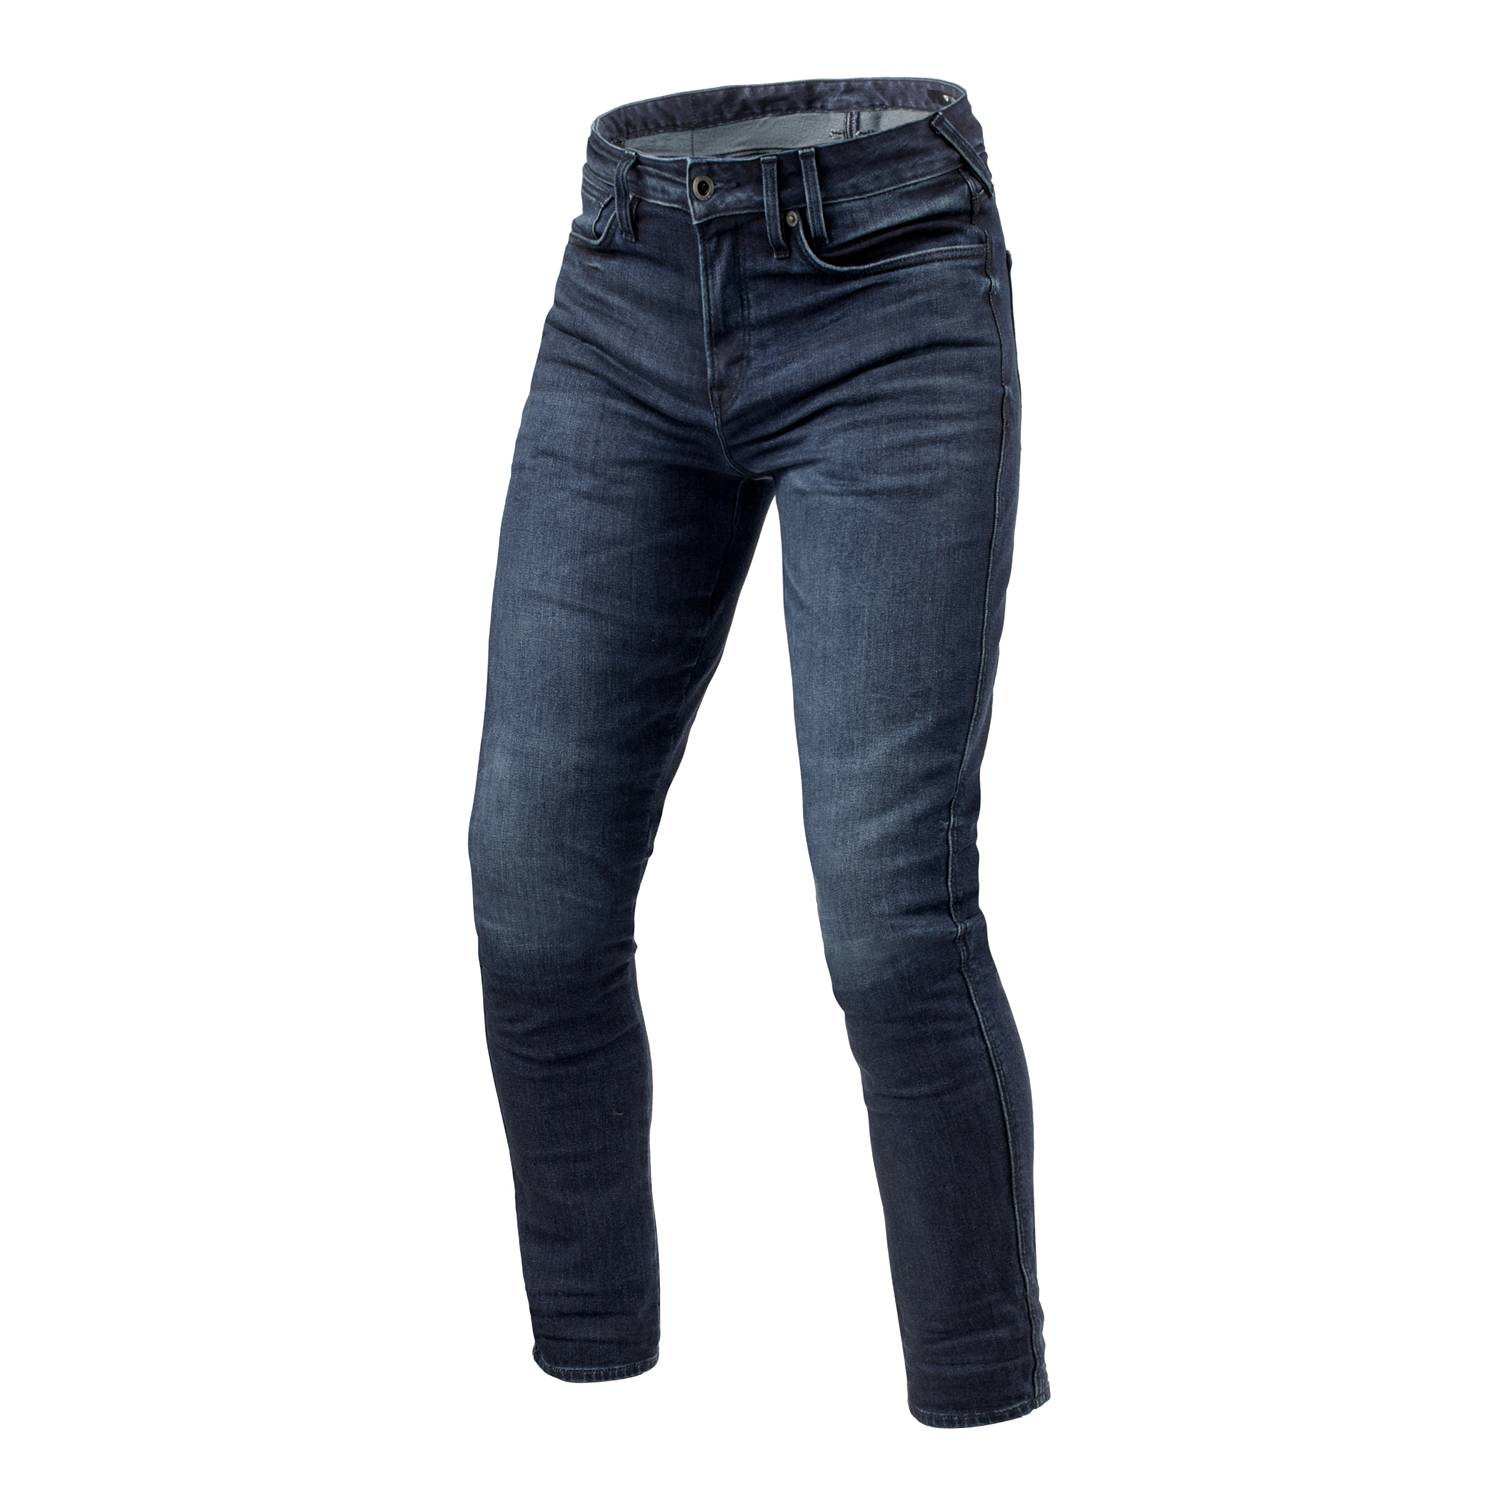 Image of REV'IT! Jeans Carlin SK Dark Blue Used L34 Motorcycle Jeans Size L34/W36 ID 8700001376433